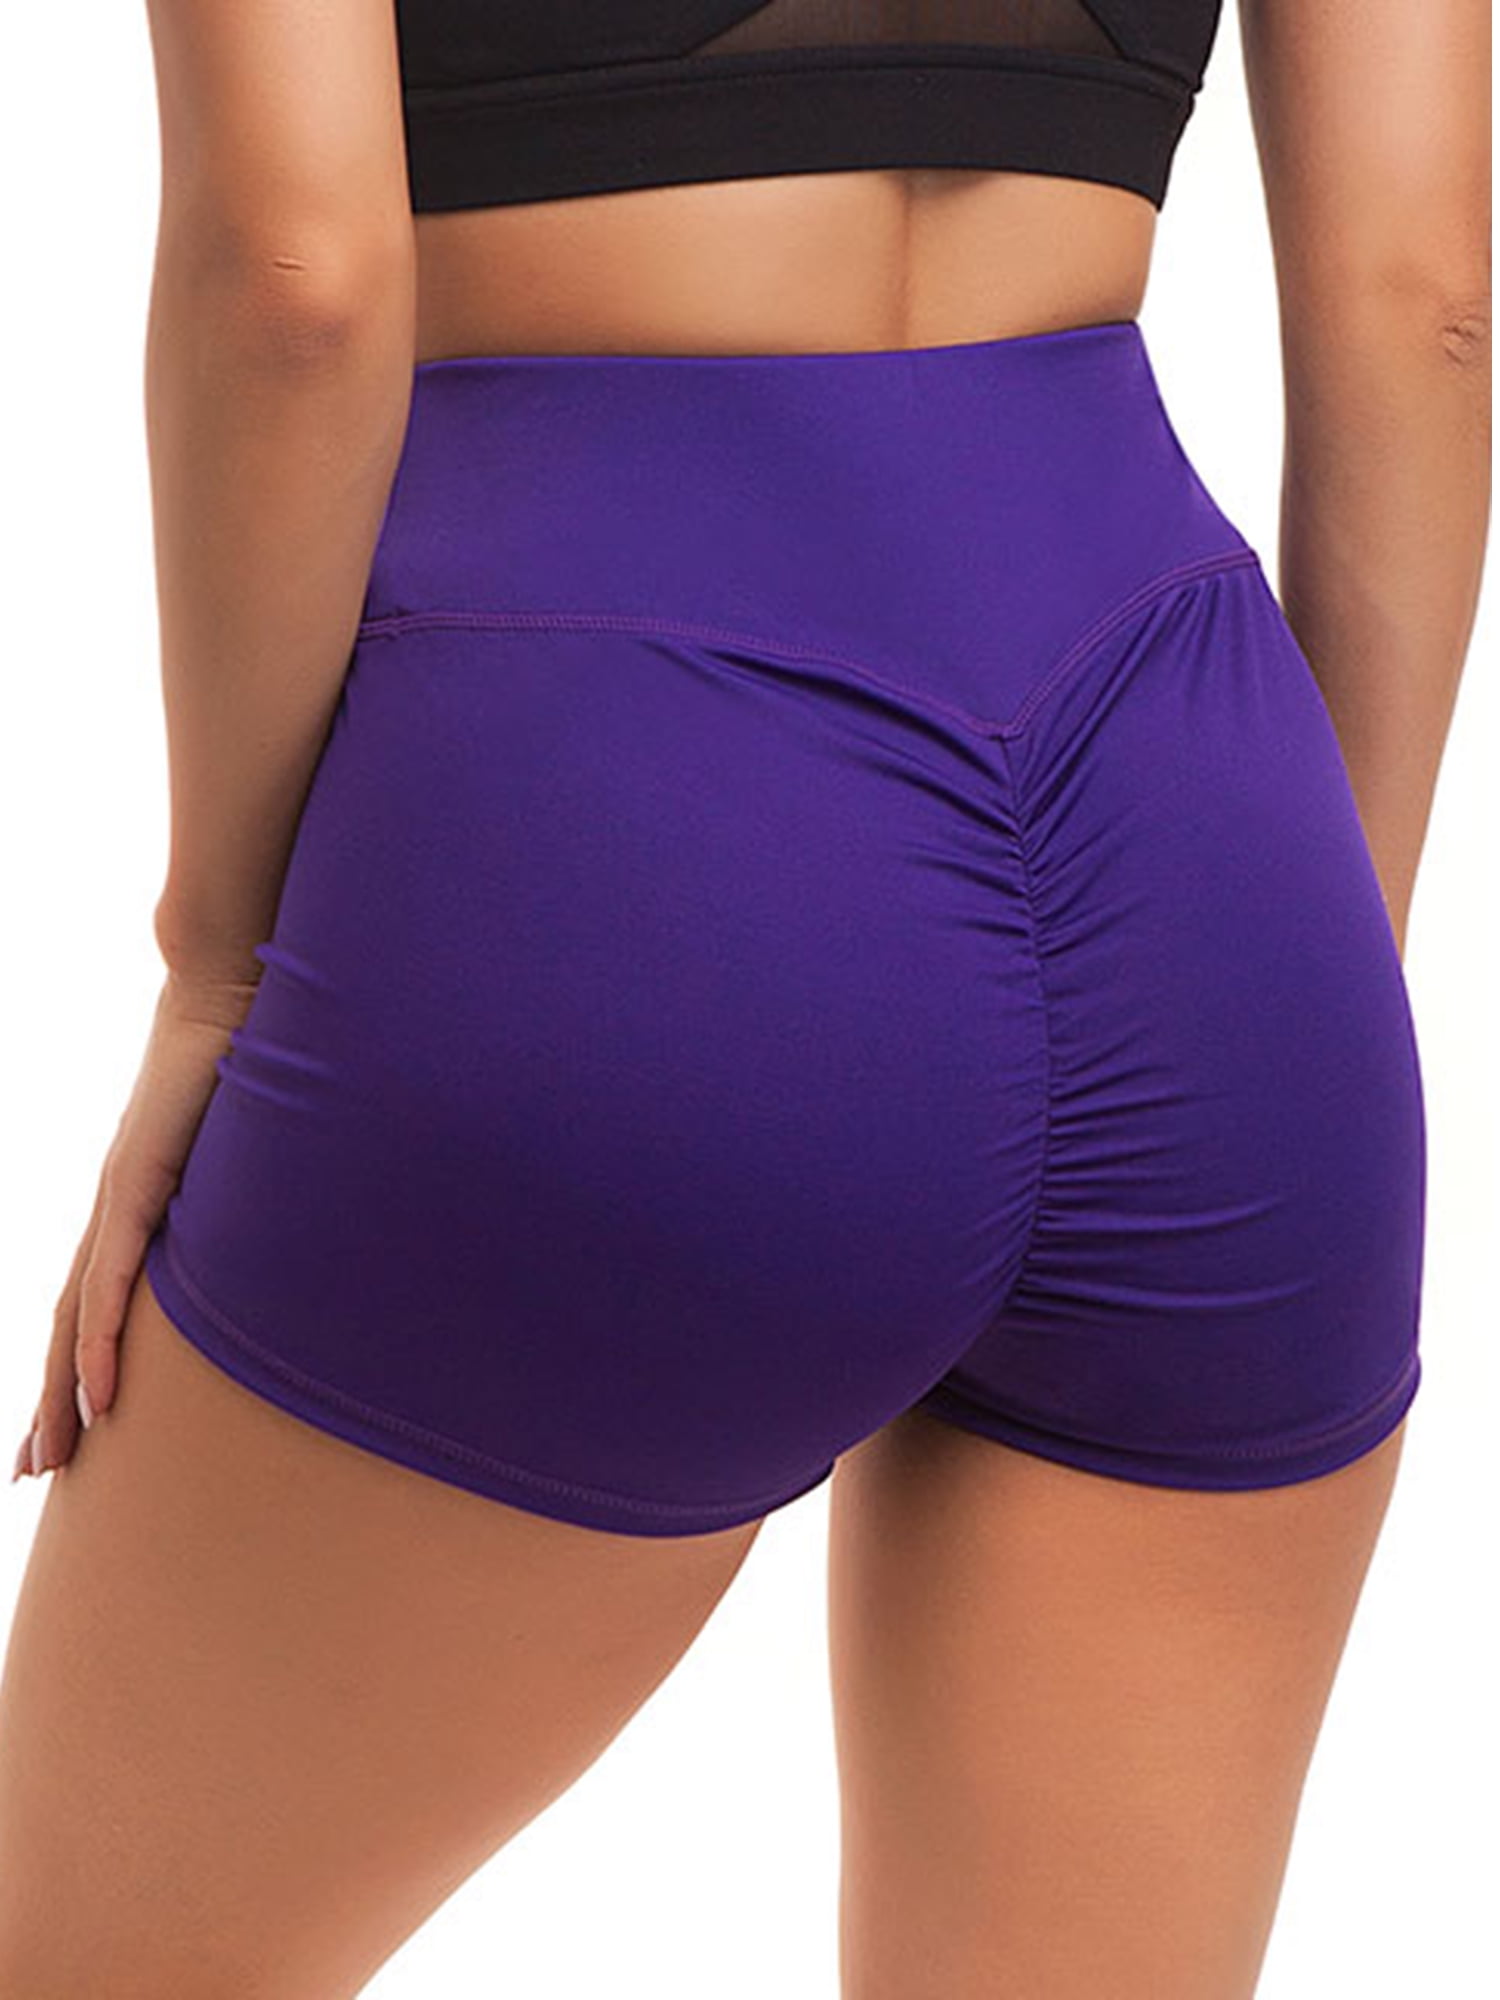 Women Sports Yoga Shorts Push Up Ruched Gym Workout Fitness Casual Hot Pants AM 